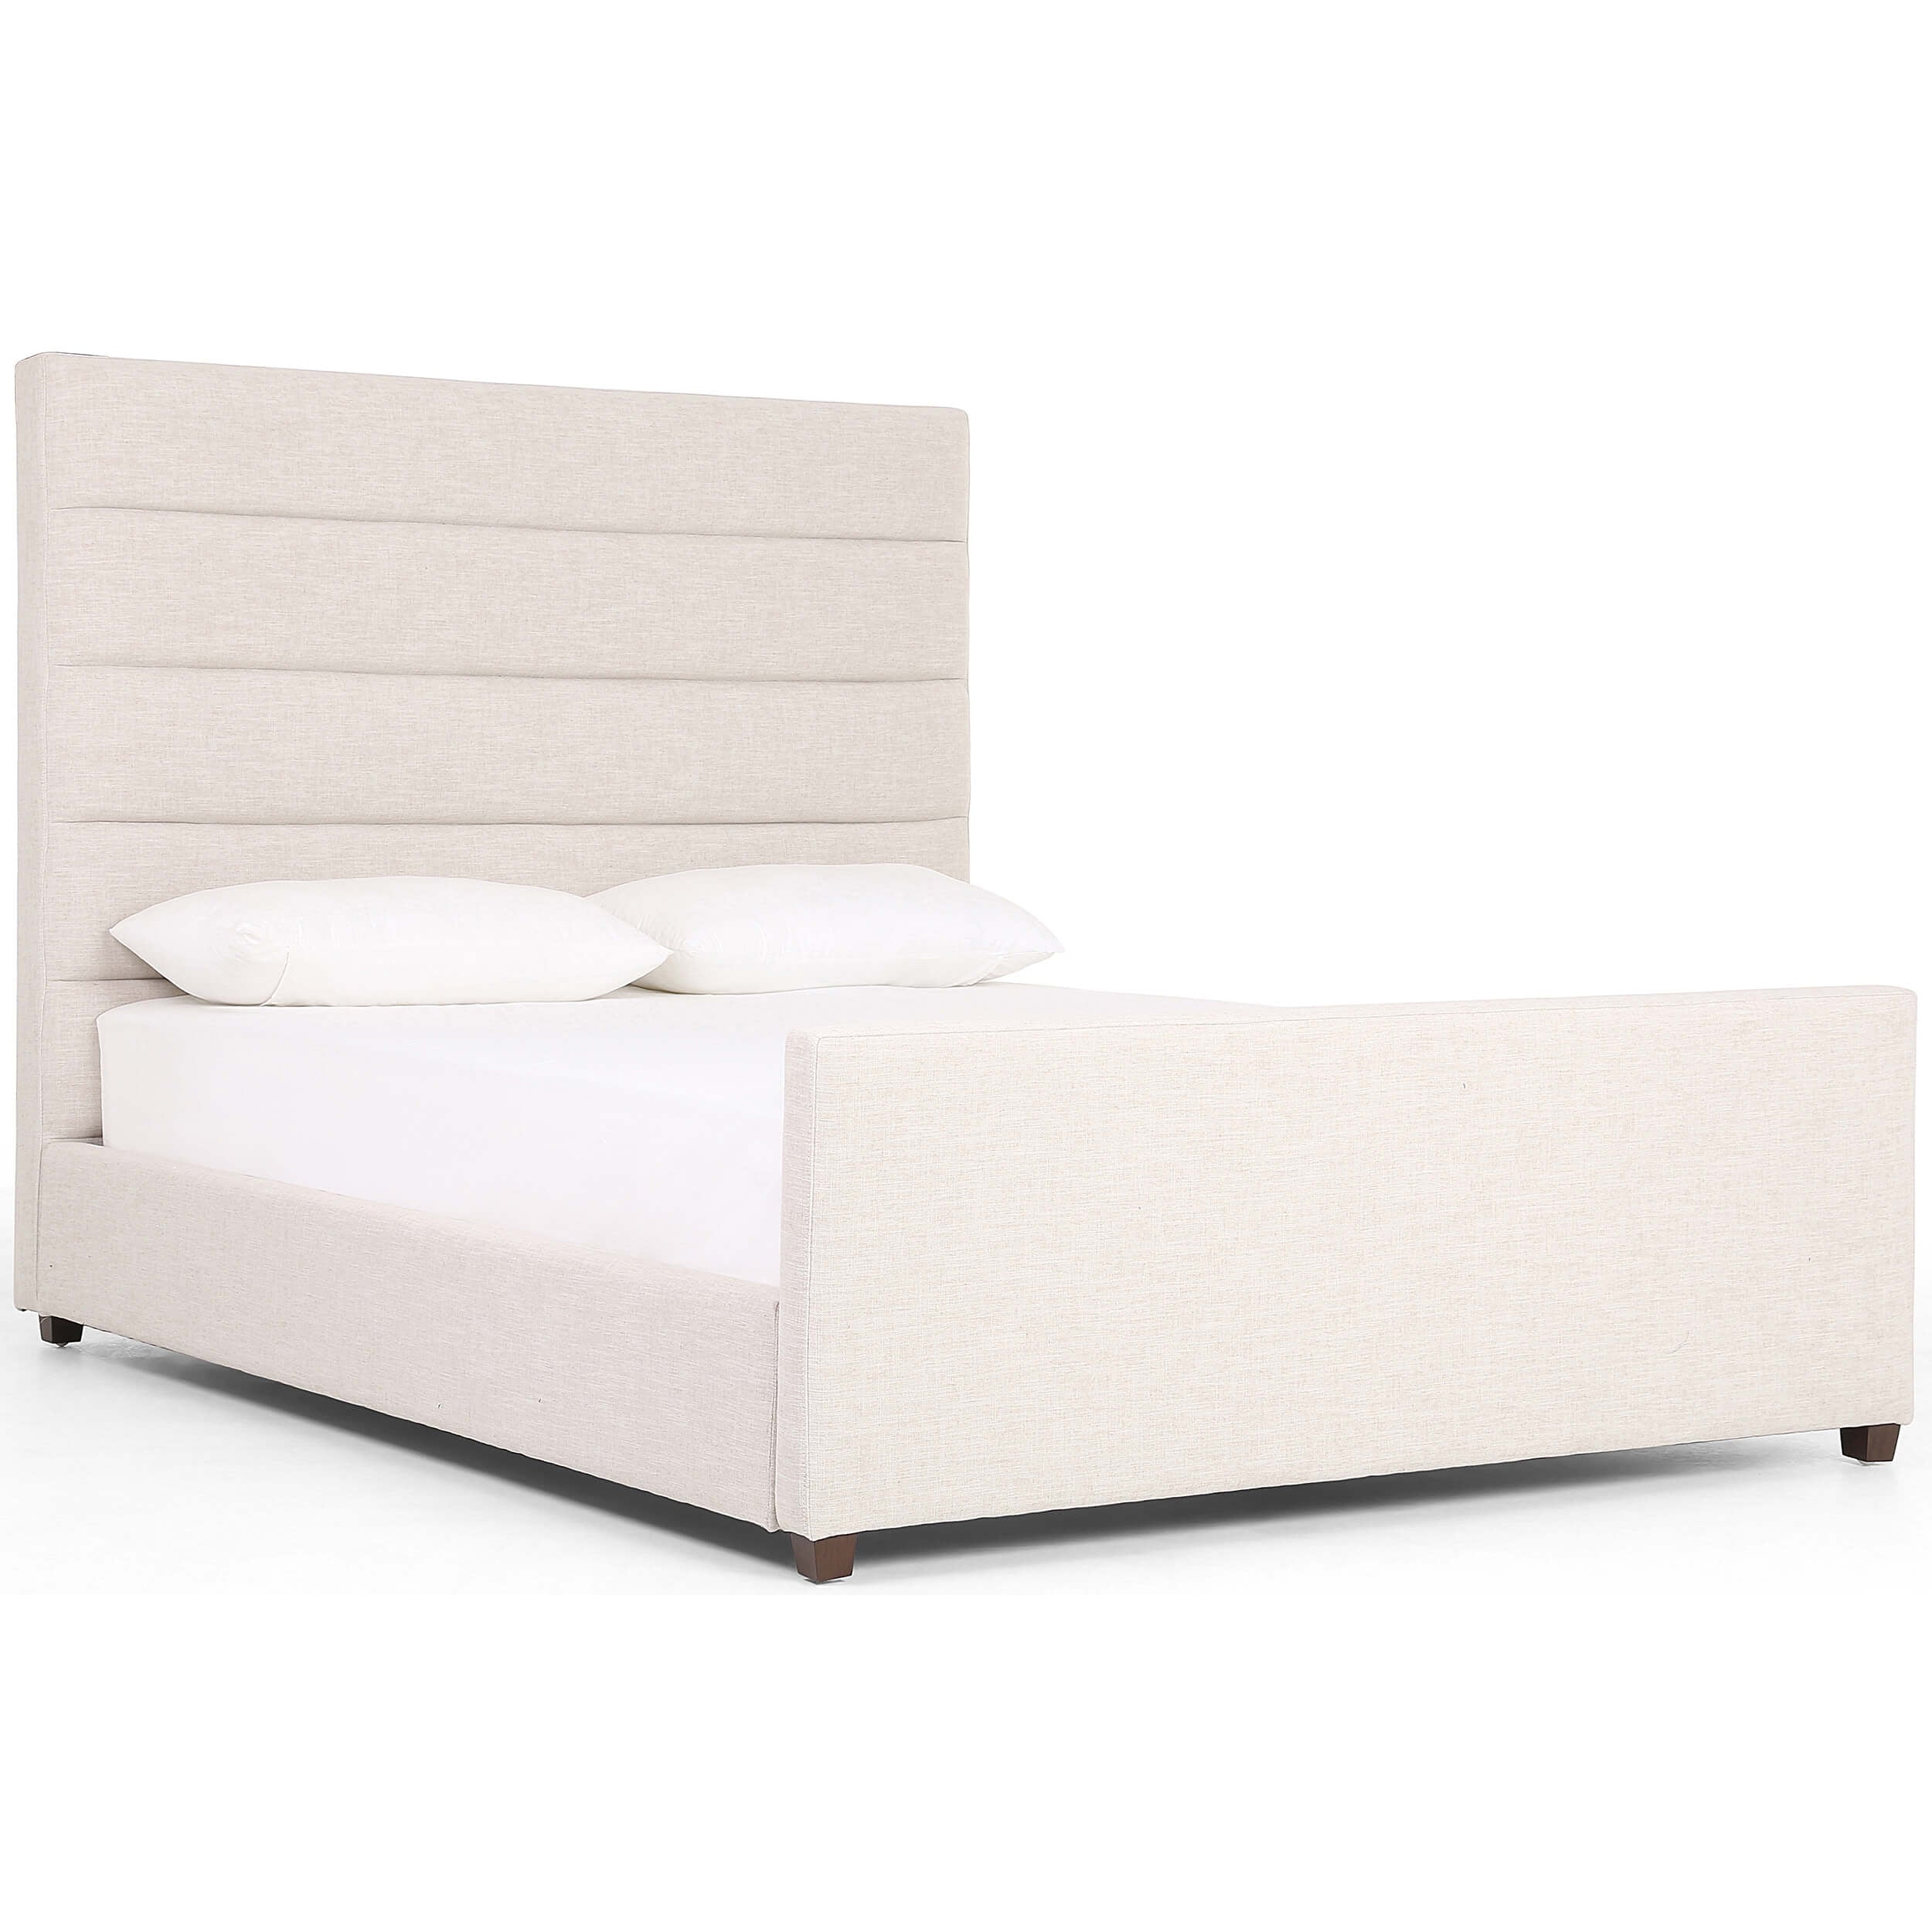 Image of Daphne Bed, Cambric Ivory